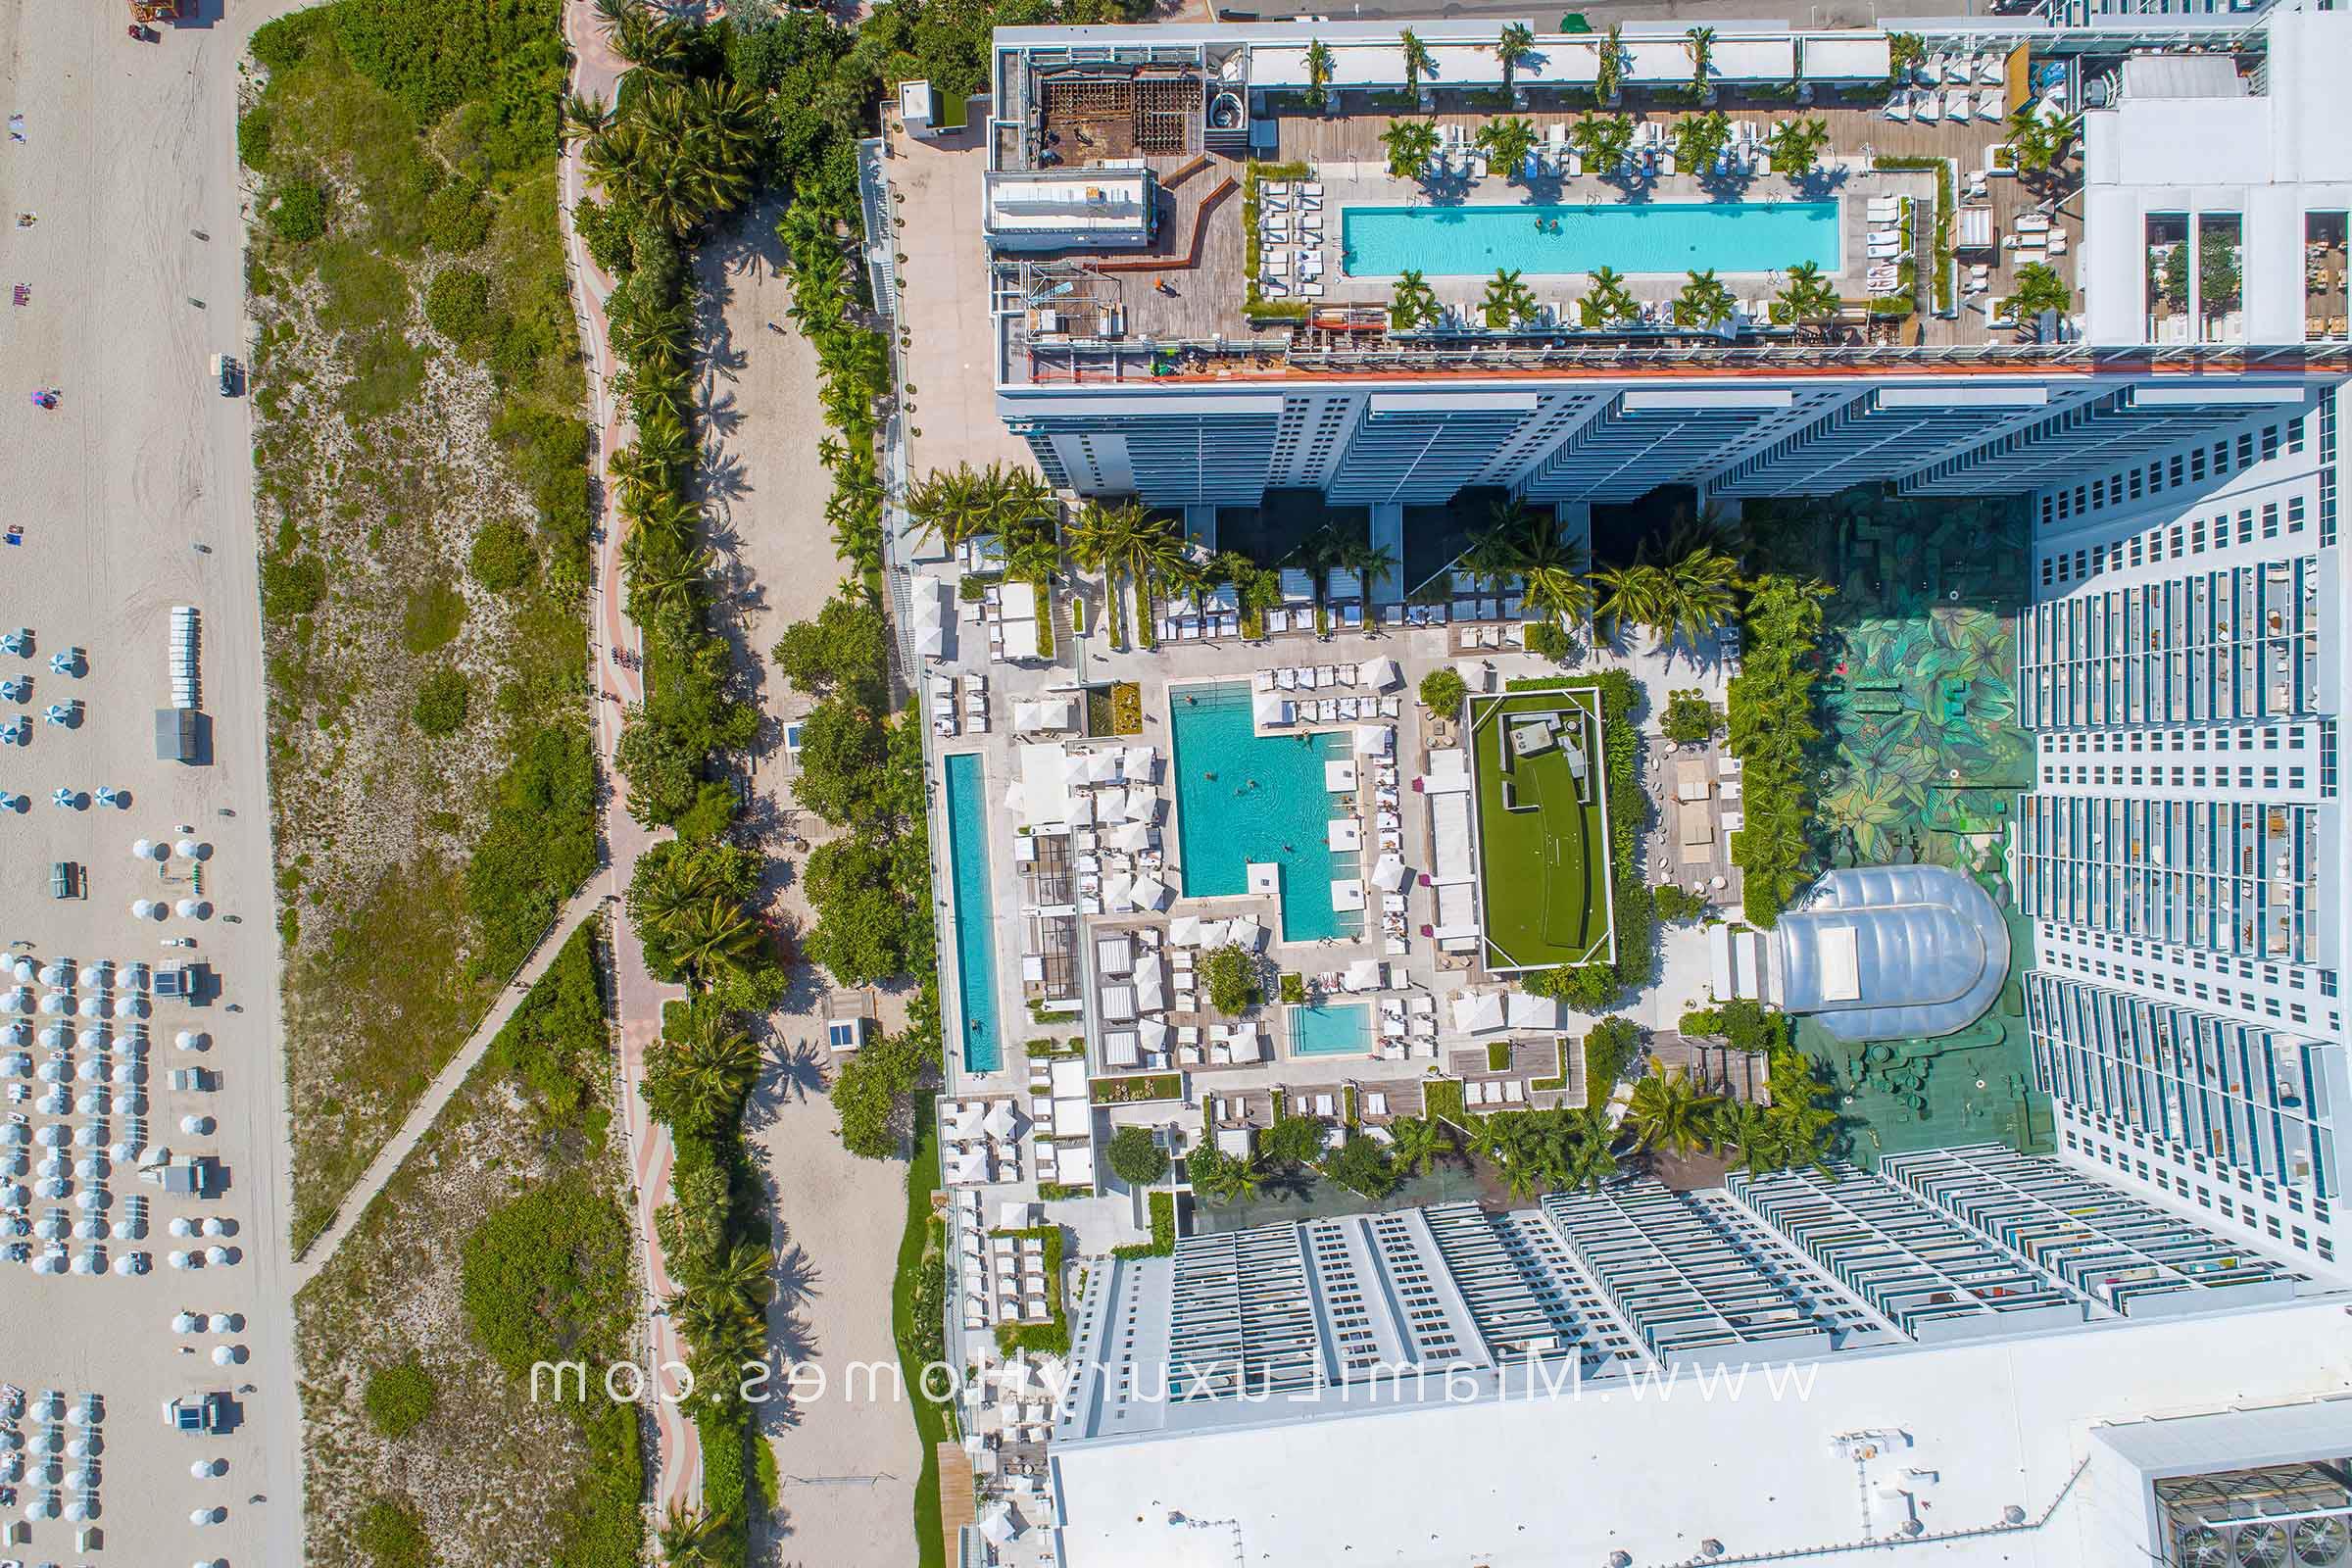 Aerial View of the Amenities at 1 Hotel in South Beach